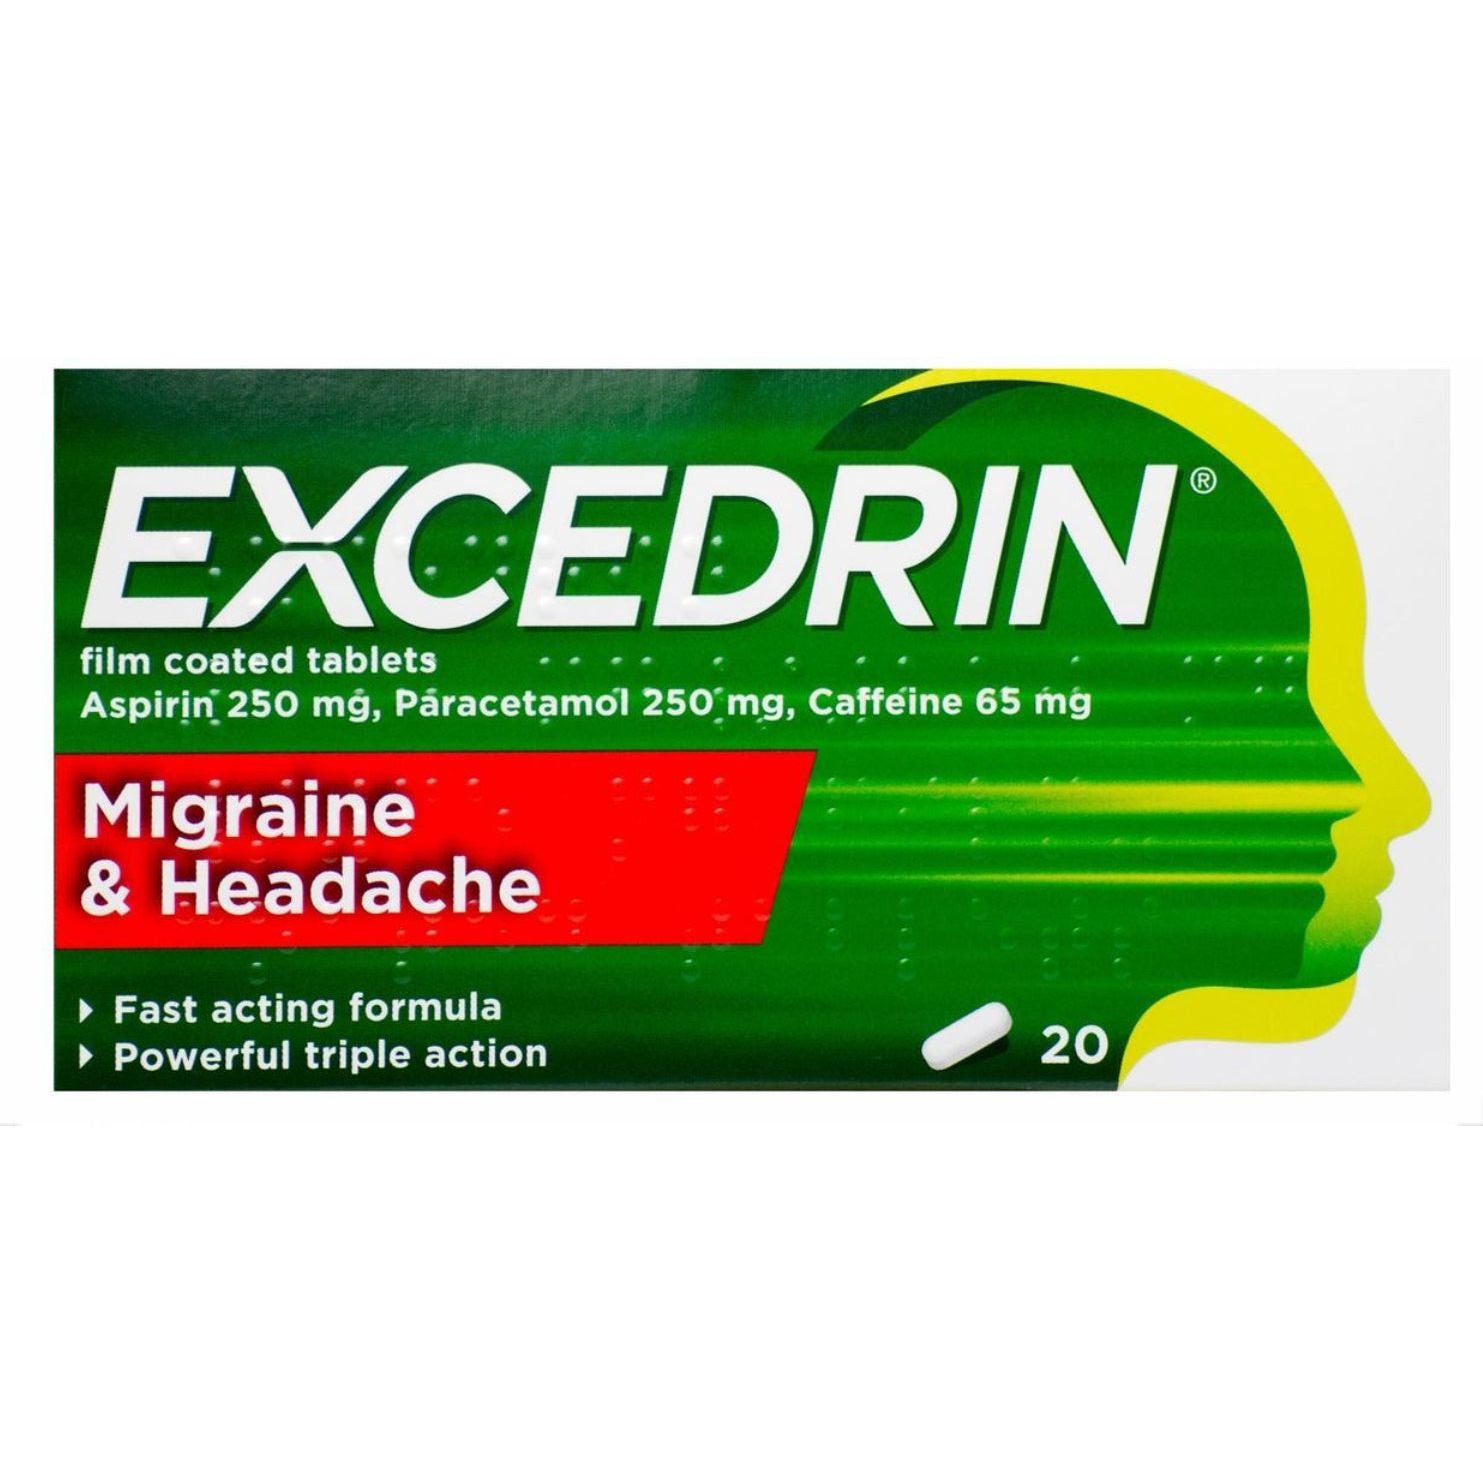 Excedrin Tablet 20s